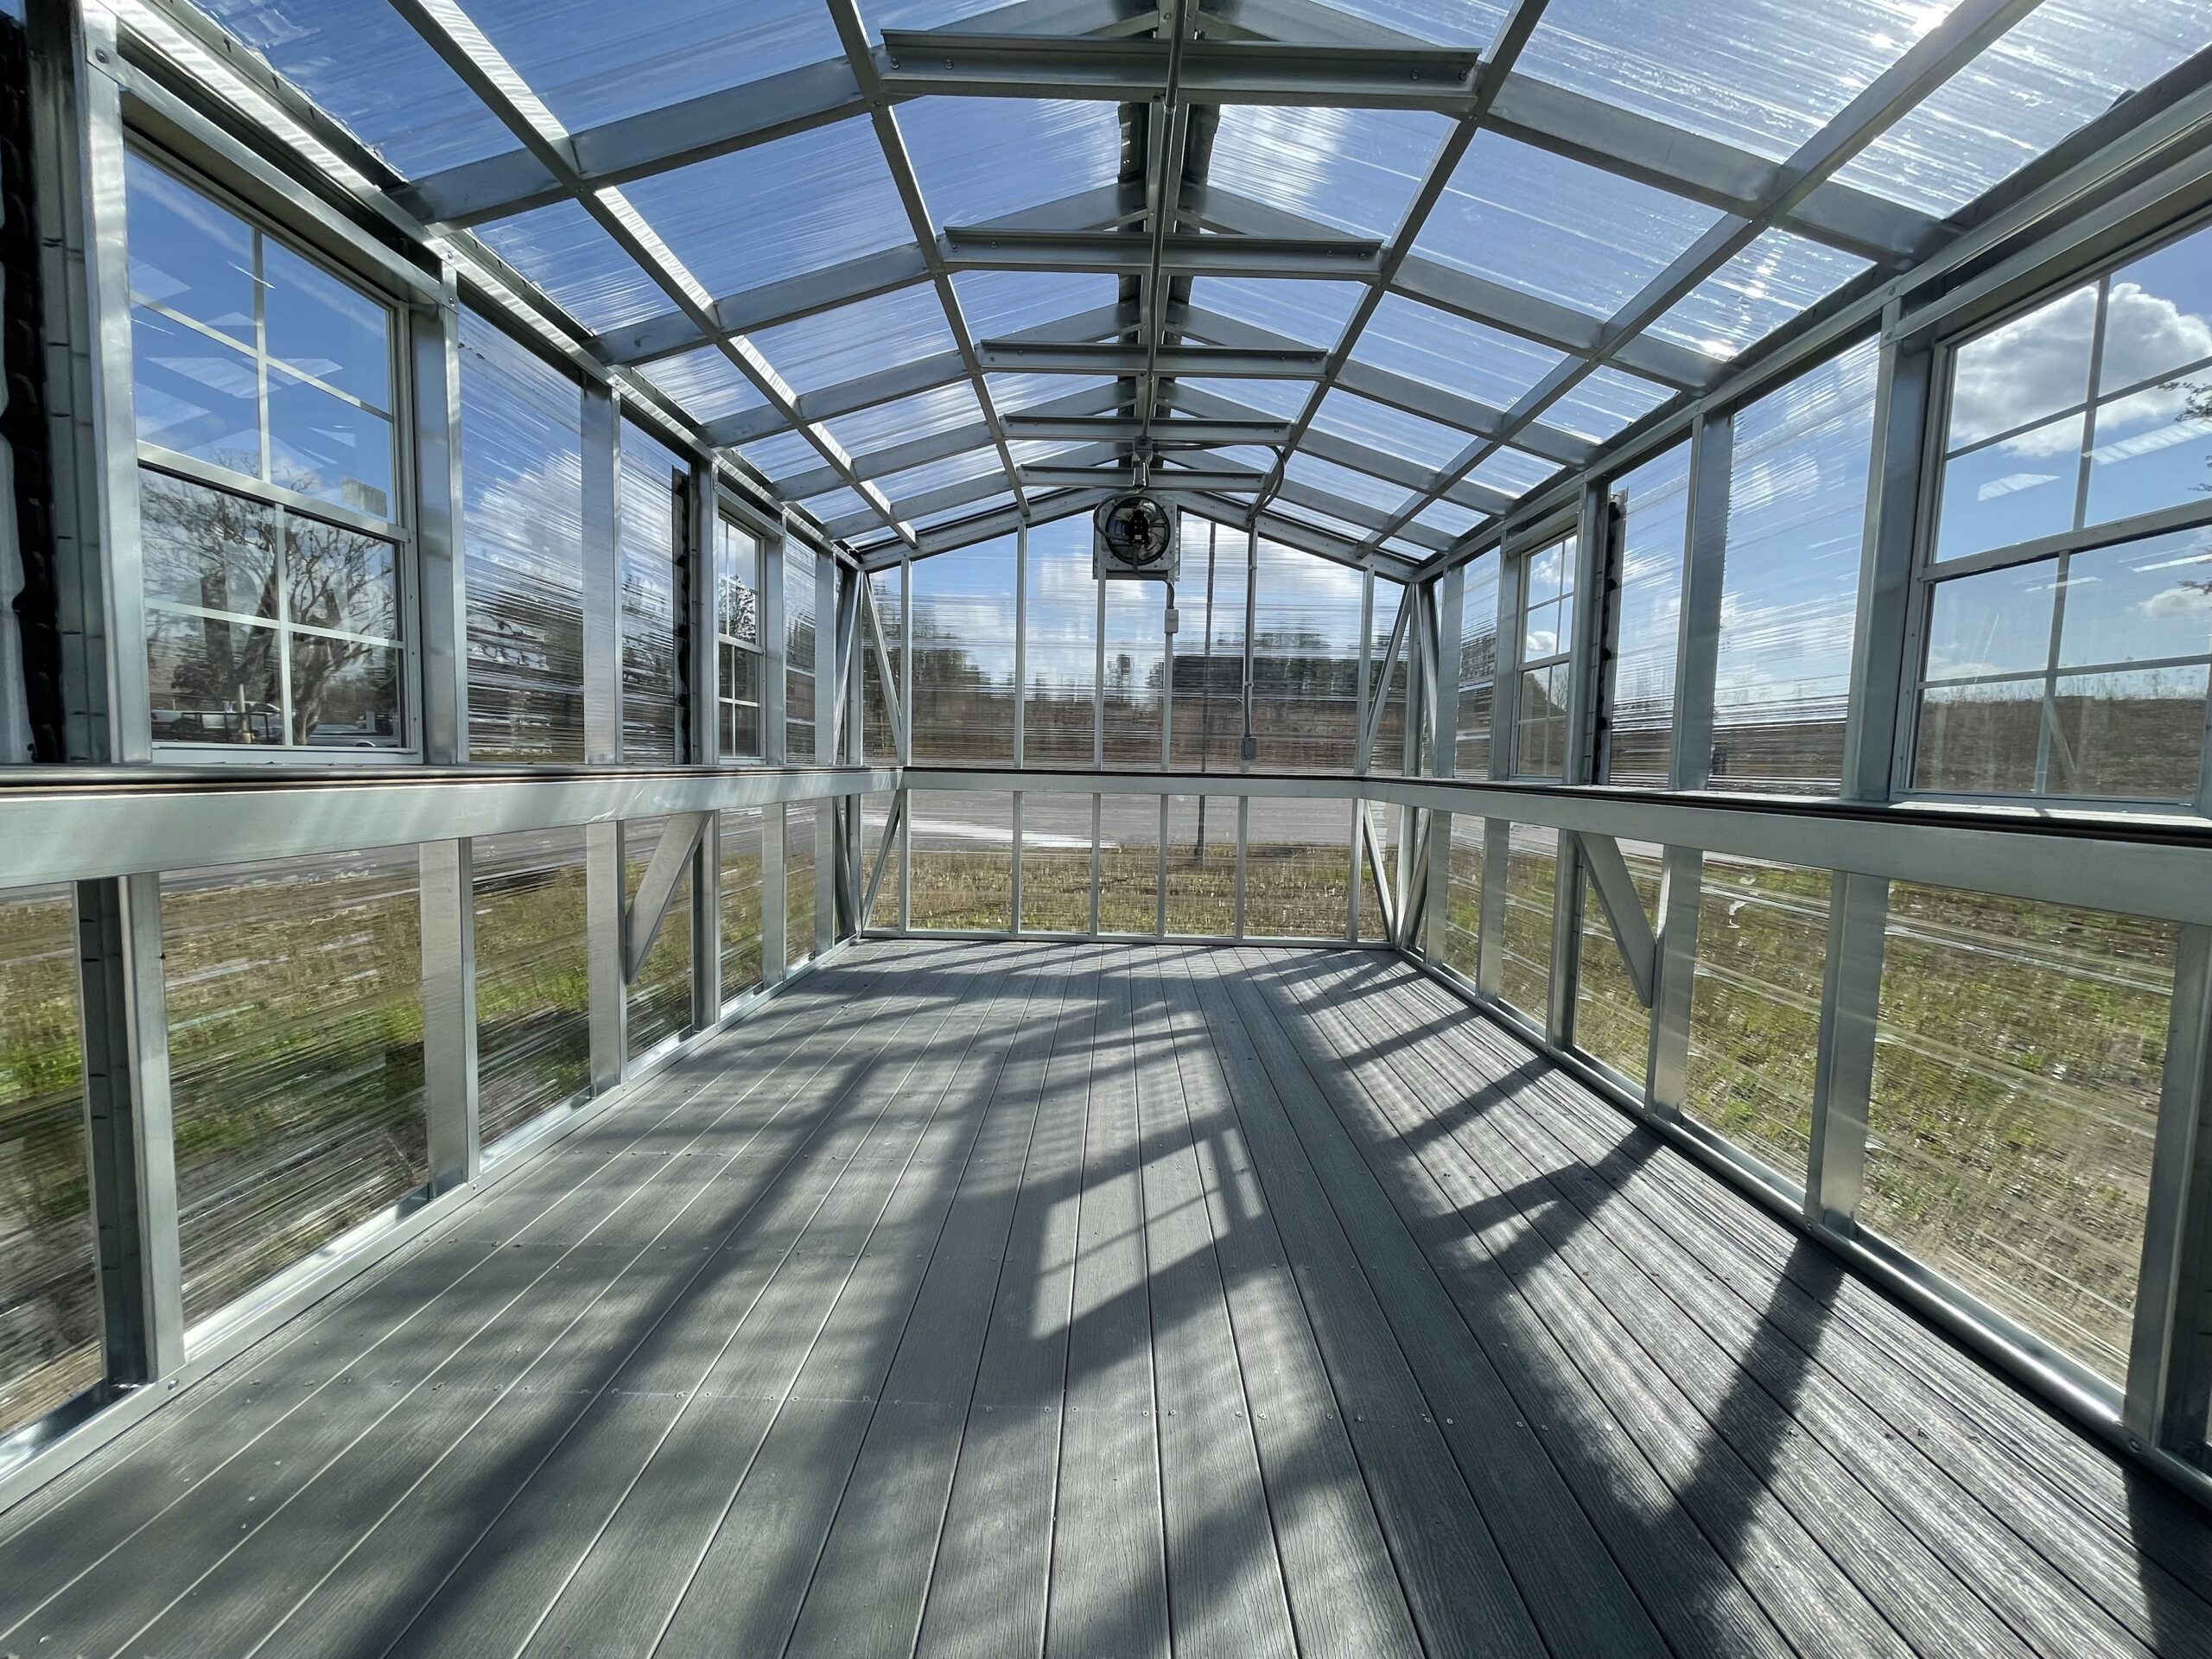 Inside view of our Greenhouse model GH-6